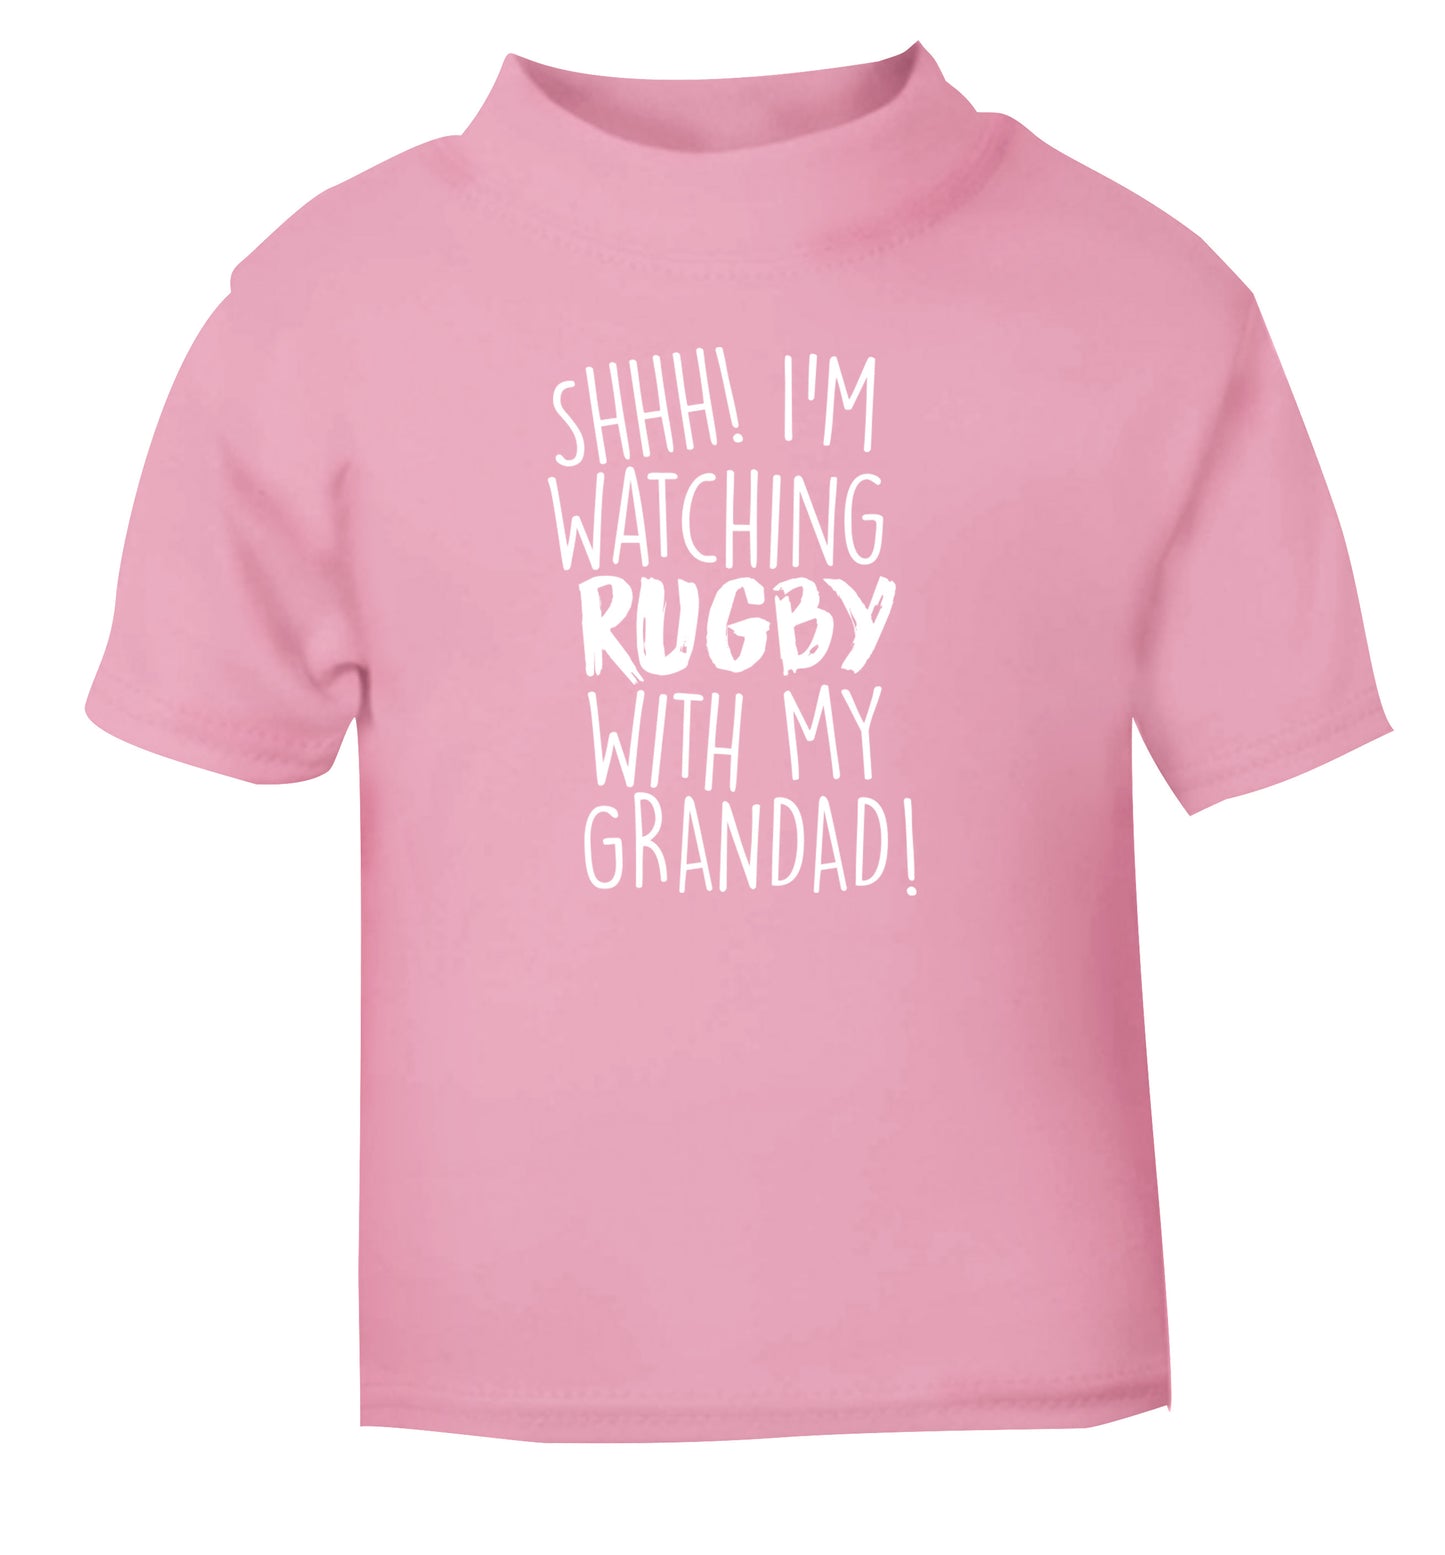 Shh I'm watching rugby with my grandad light pink Baby Toddler Tshirt 2 Years